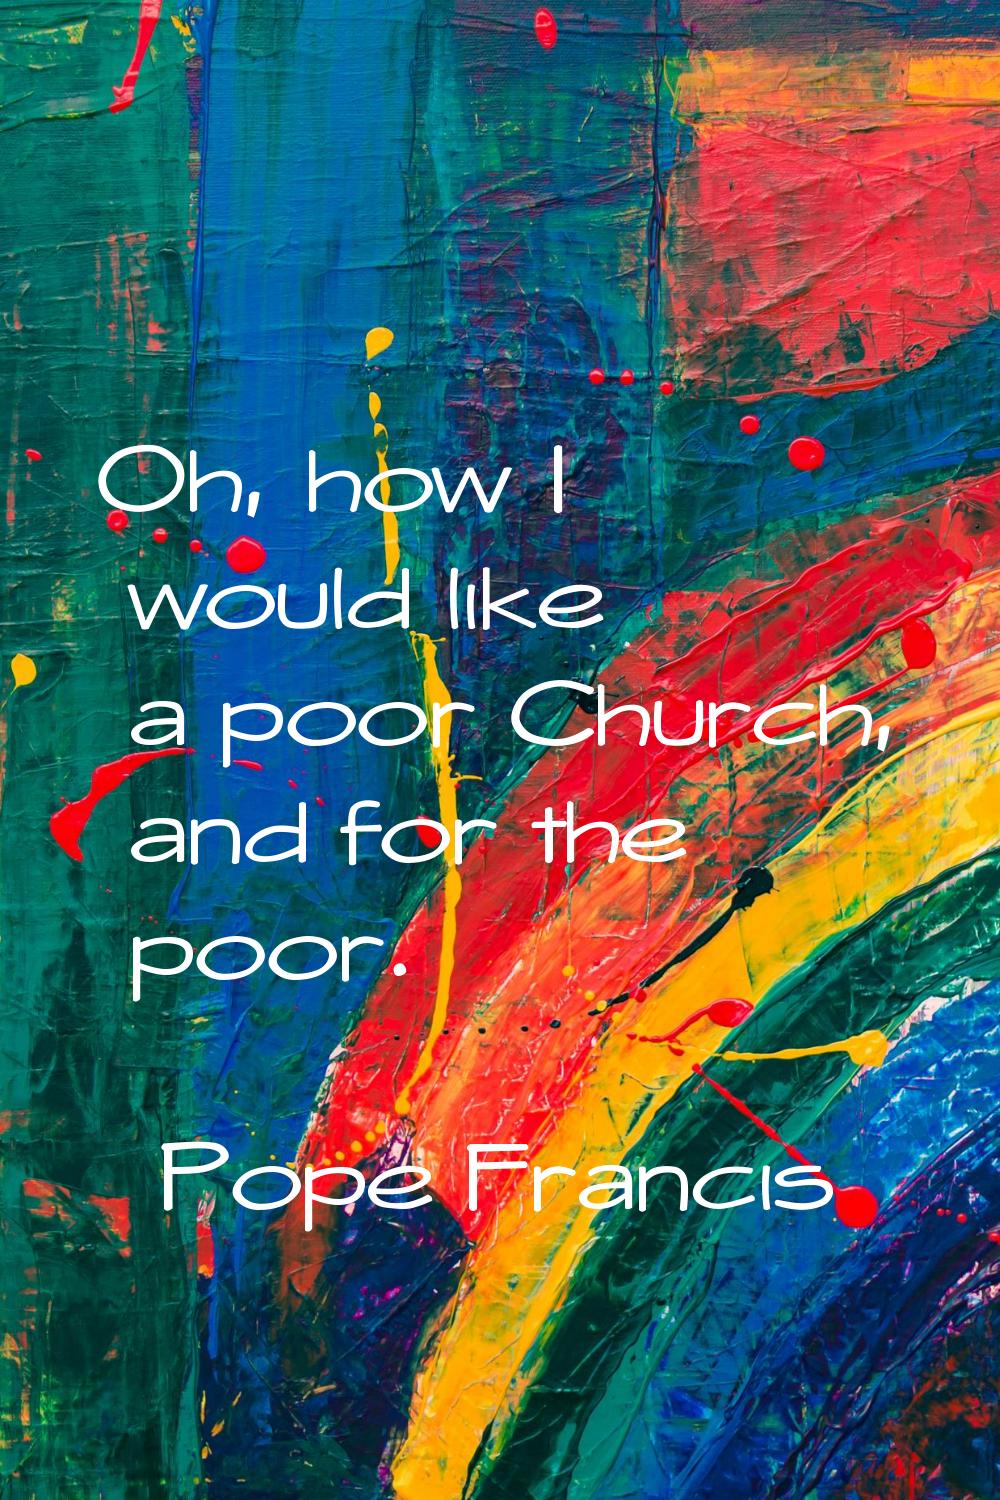 Oh, how I would like a poor Church, and for the poor.